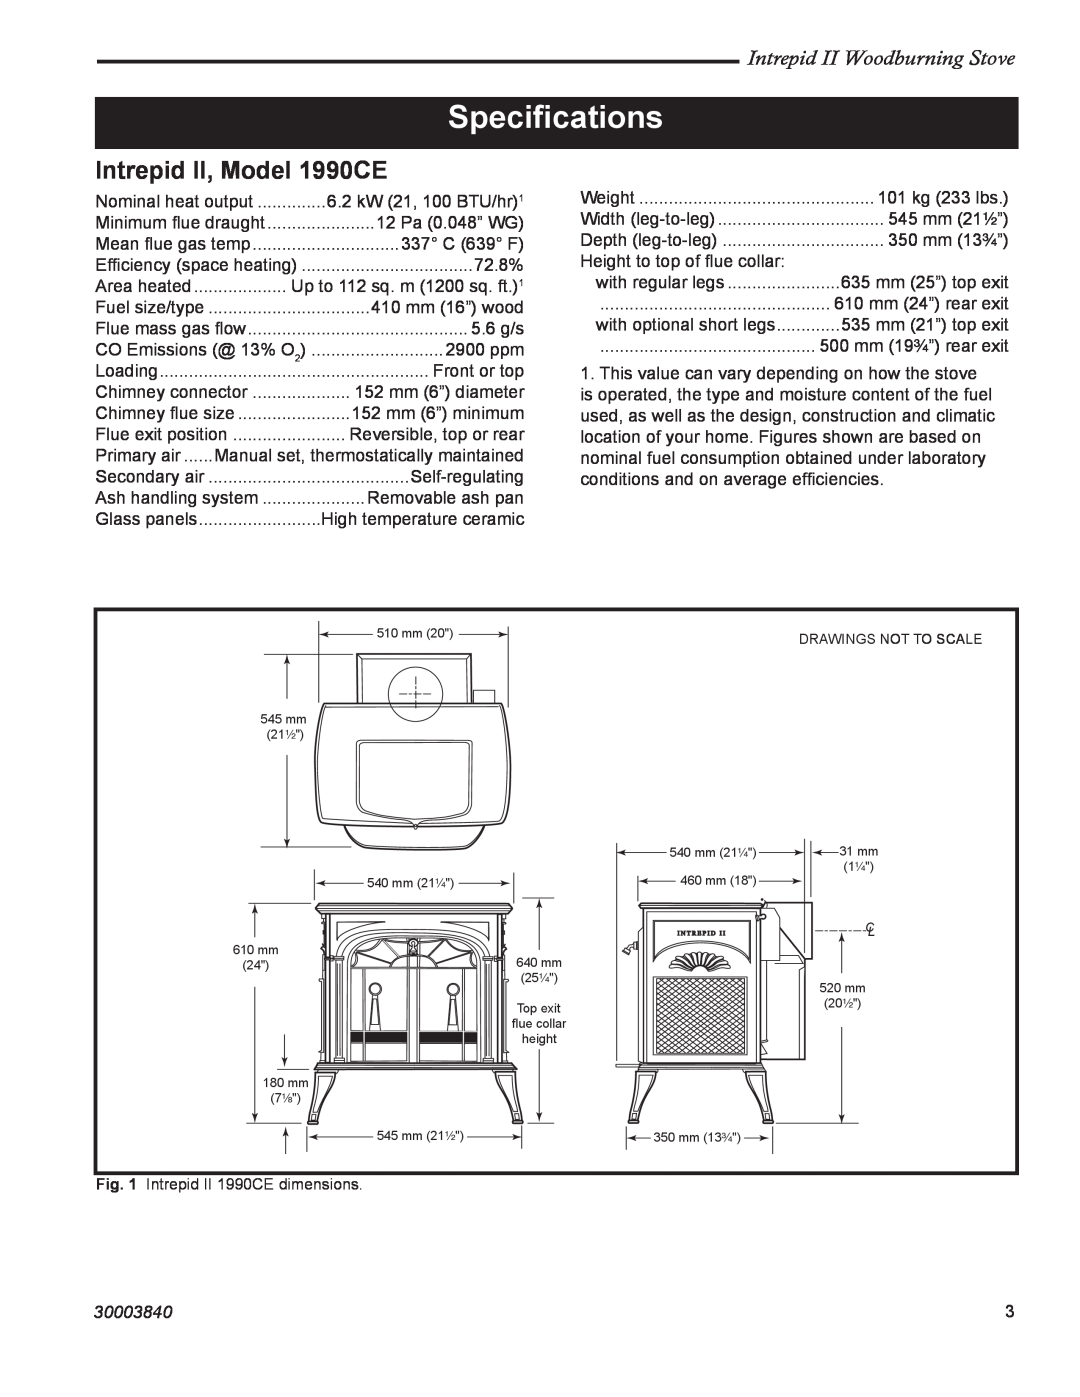 Vermont Casting Speciﬁcations, Intrepid II, Model 1990CE, Intrepid II Woodburning Stove, 30003840 